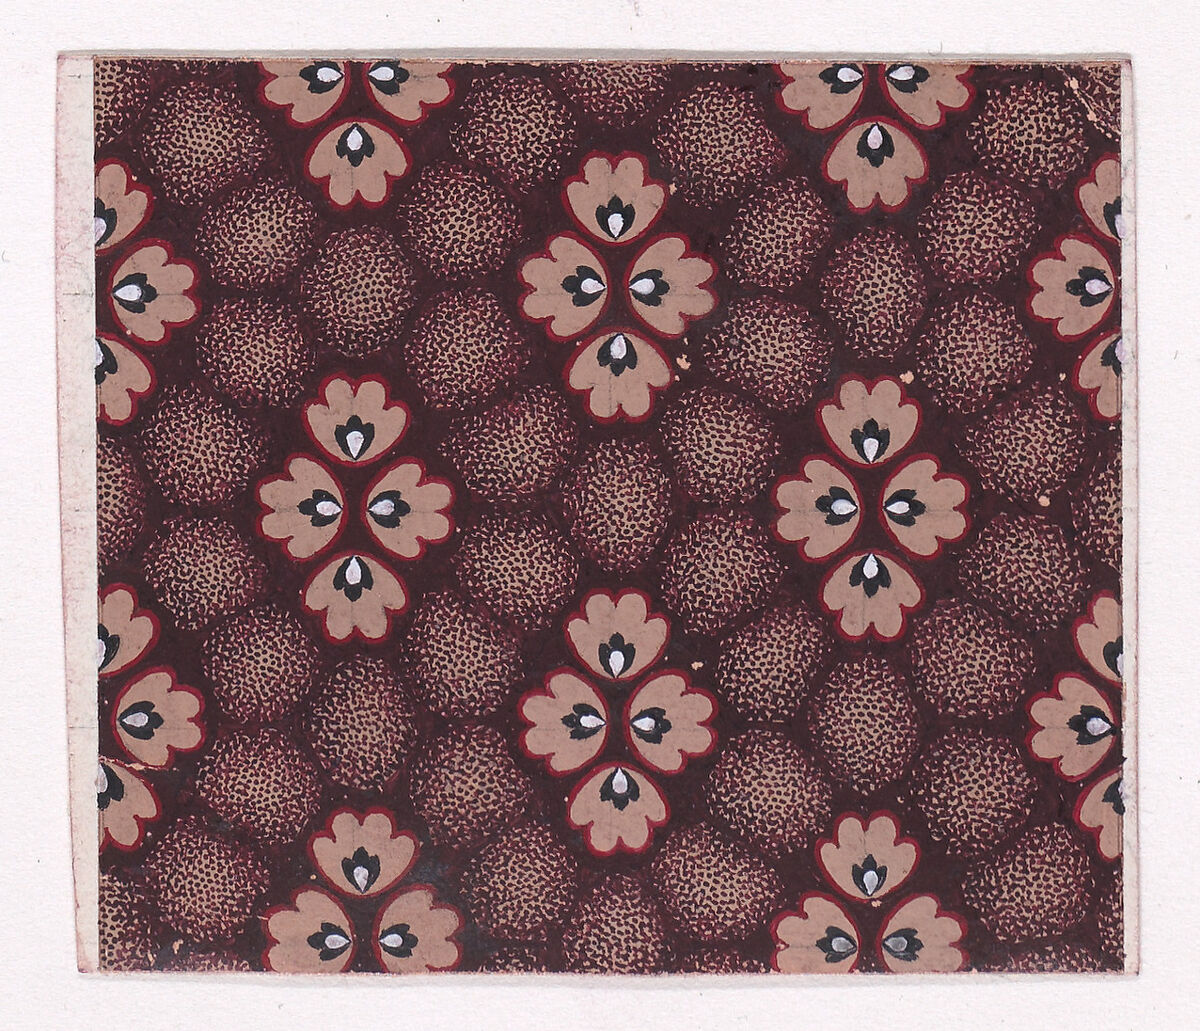 Textile Design with Rosettes with Pearls as Pistils Grouped Together to Form Stylized Flowers over an Abstract Honeycomb Pattern in the Background, Anonymous, Alsatian, 19th century, Gouache 